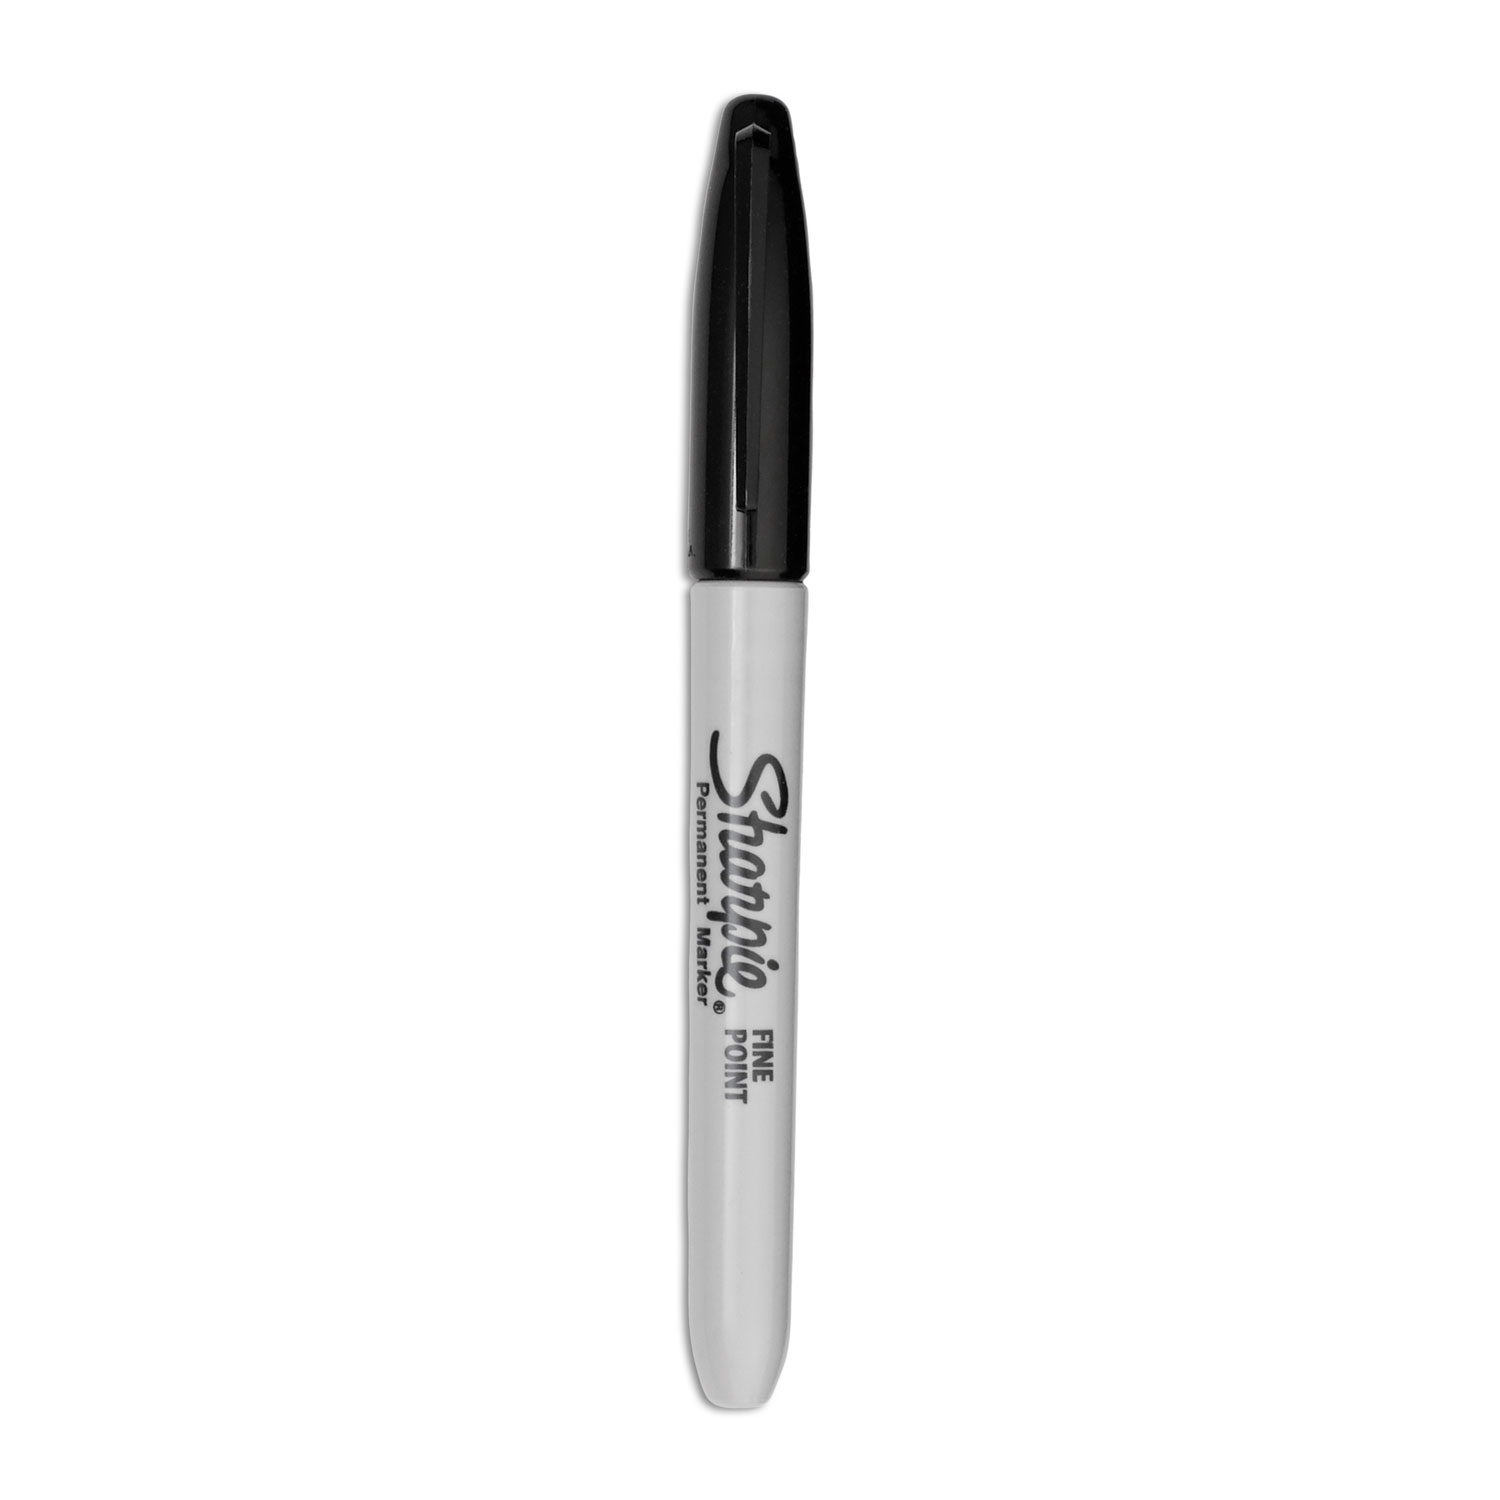  SHARPIE Retractable Permanent Markers, Ultra Fine Point,  Black, 12 Count : Extra Fine Retractable Sharpie : Office Products